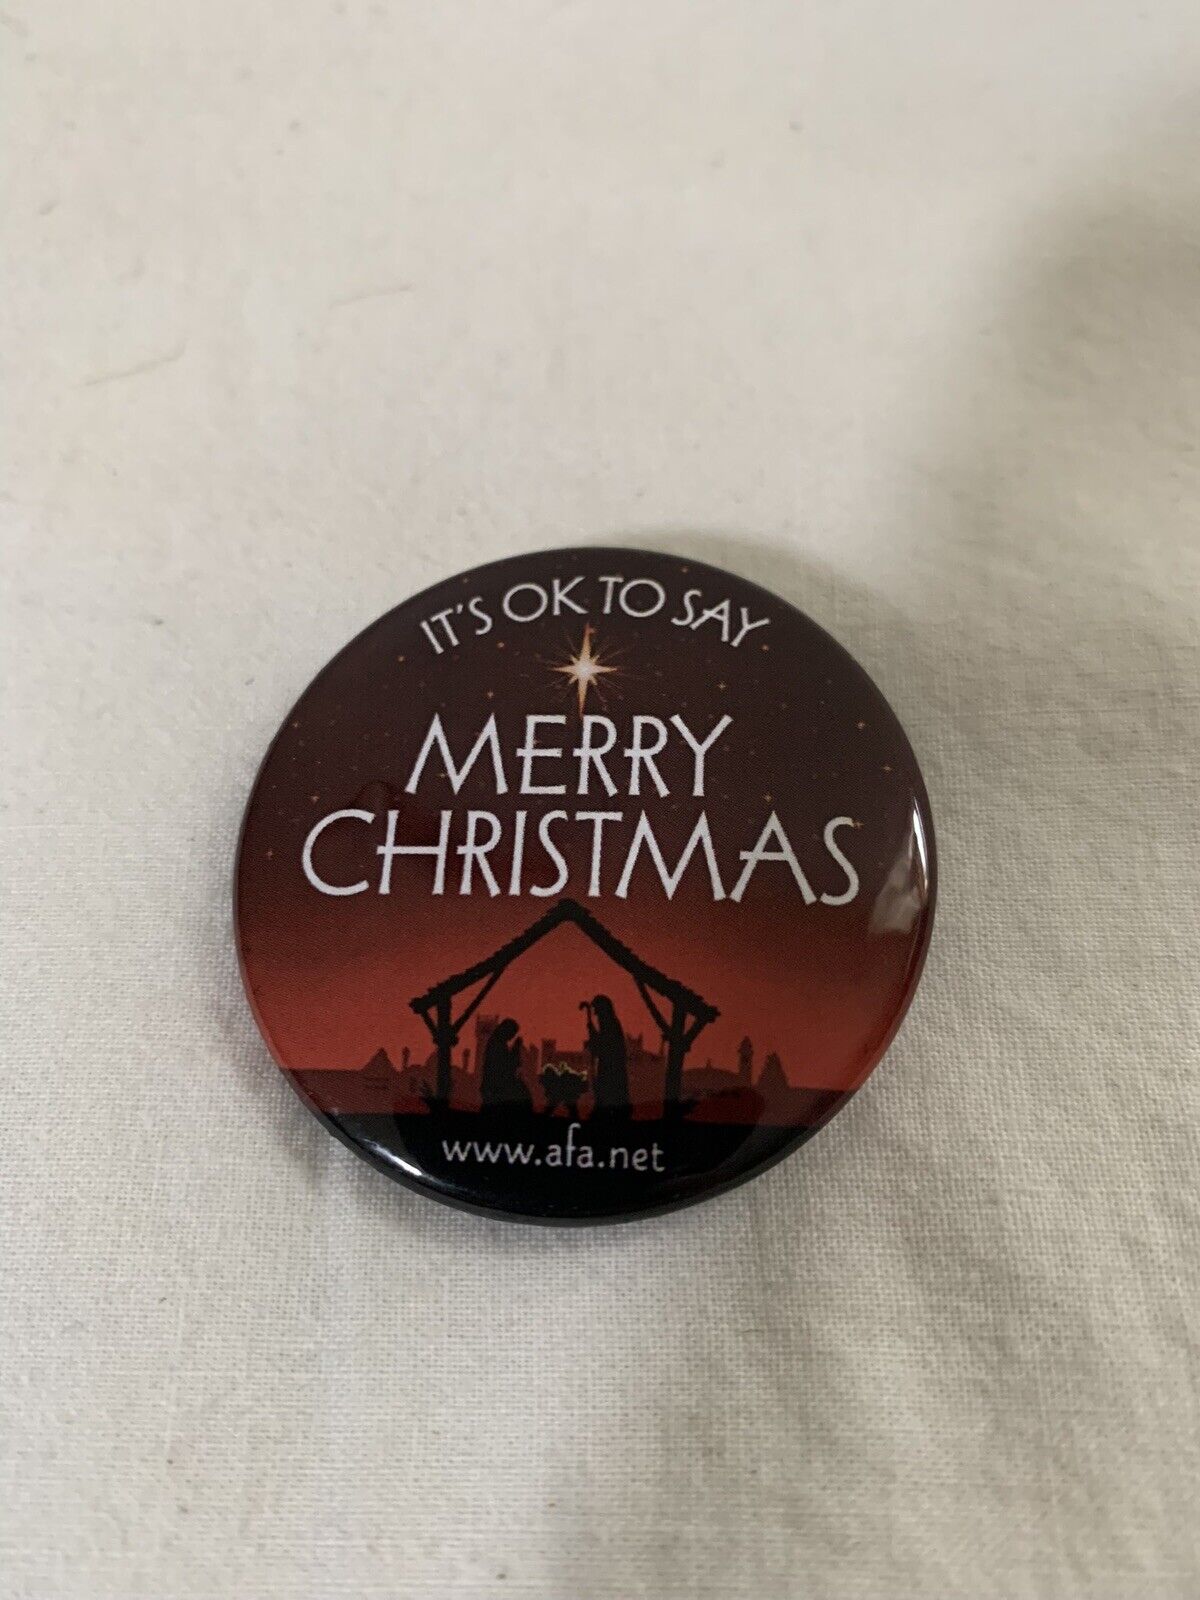 It's Ok To Say MERRY CHRISTMAS Button Pin AFA 1.75" Без бренда